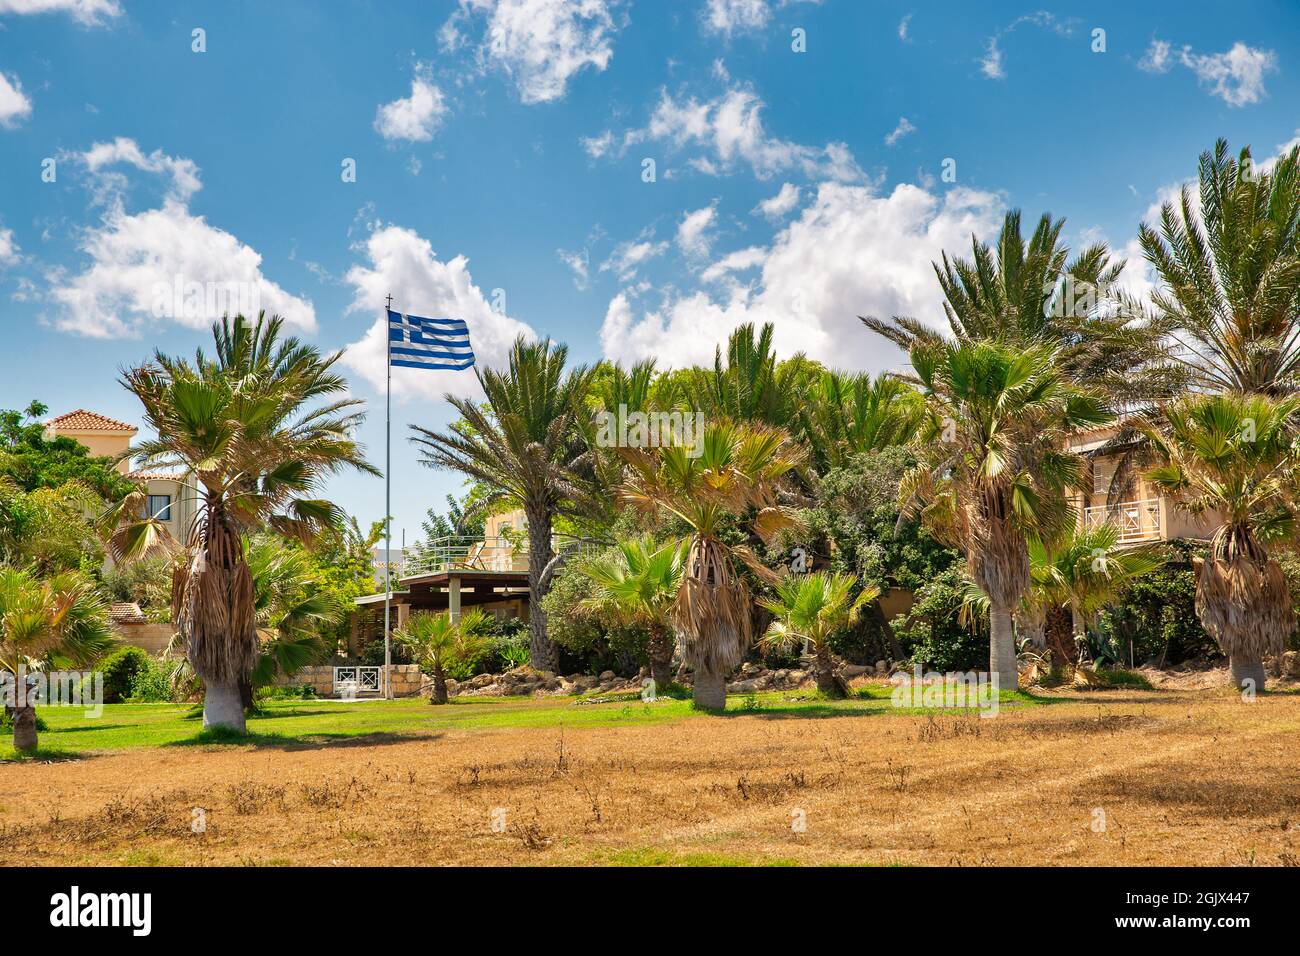 Landscape with typical Cypriot residential architecture and Greek national flag in Ayia Napa, Cyprus. Stock Photo